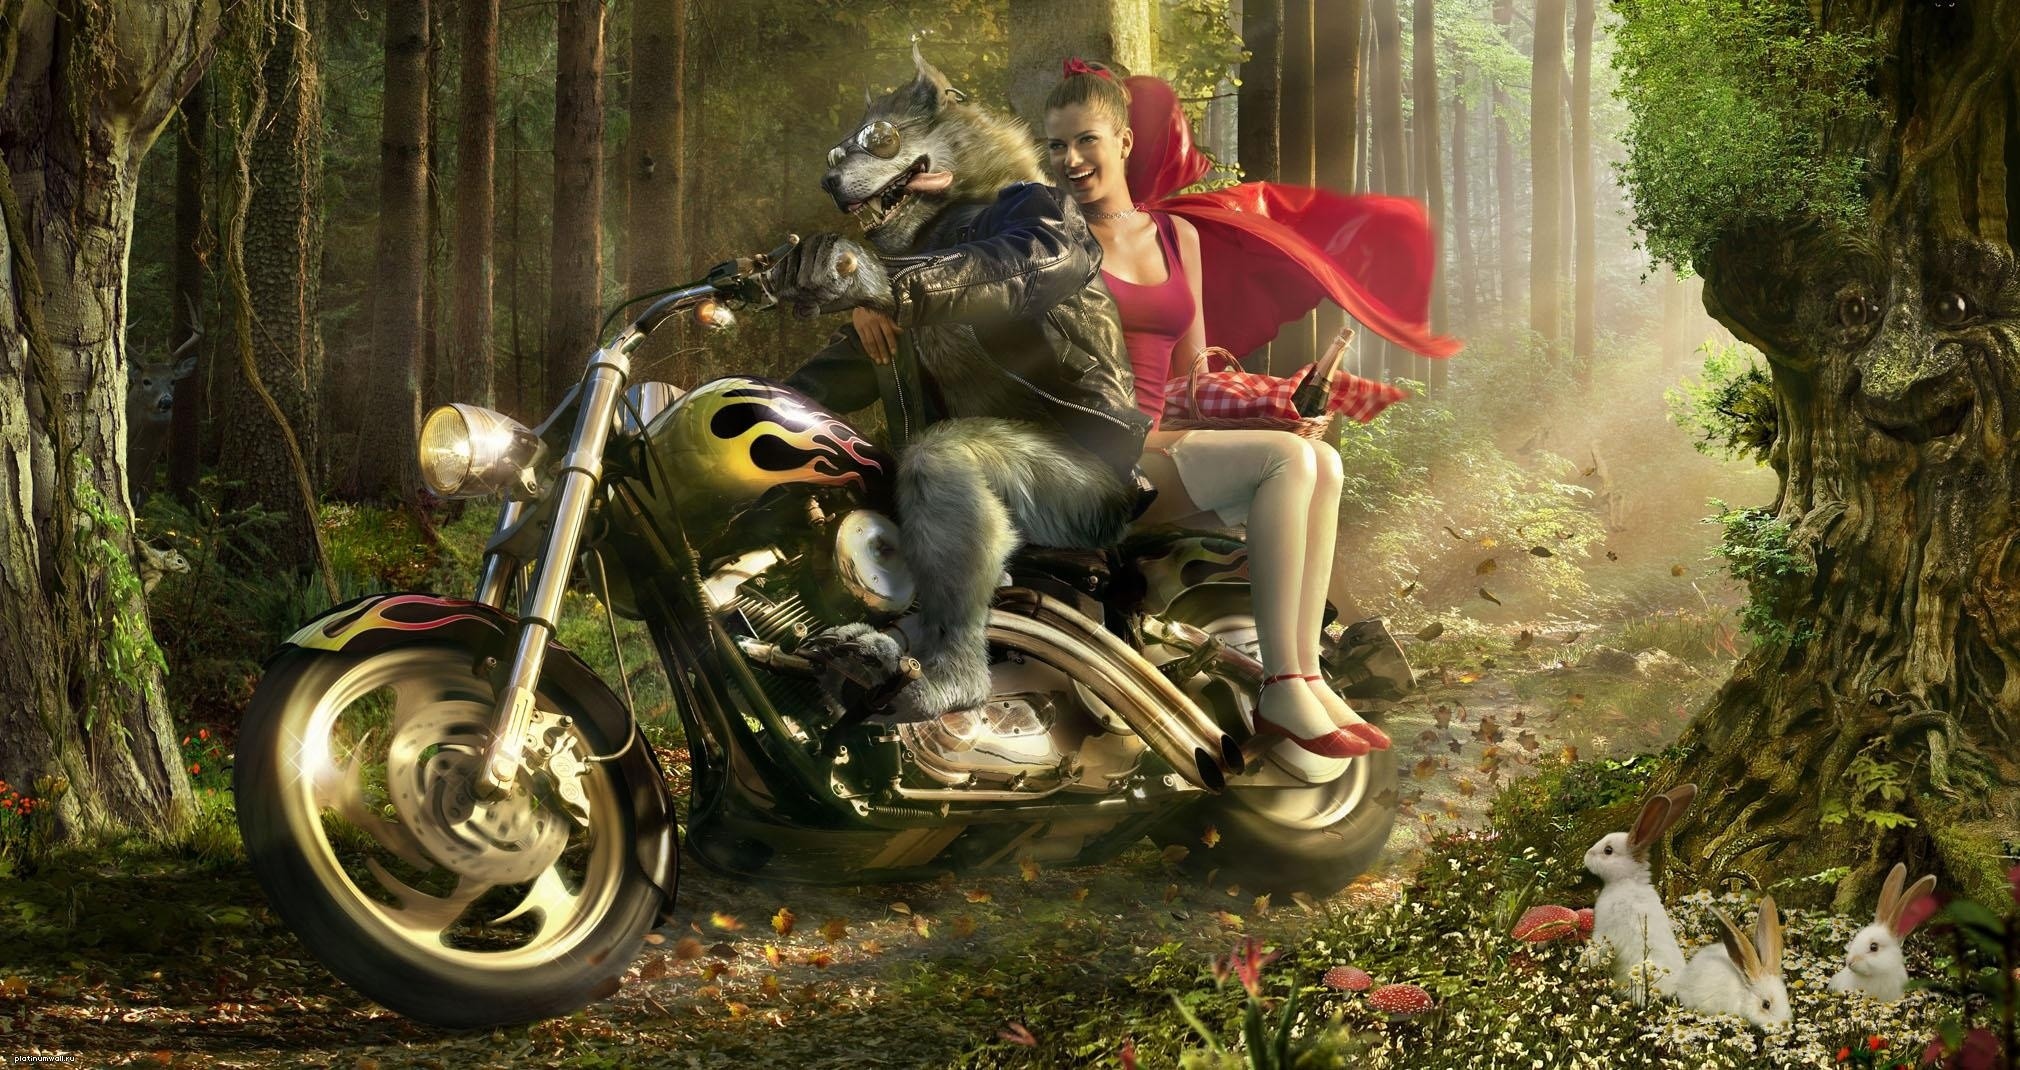 Motorcycle Fantasy Art Digital Art Little Red Riding Hood Wolf Rabbits Forest 2020x1070